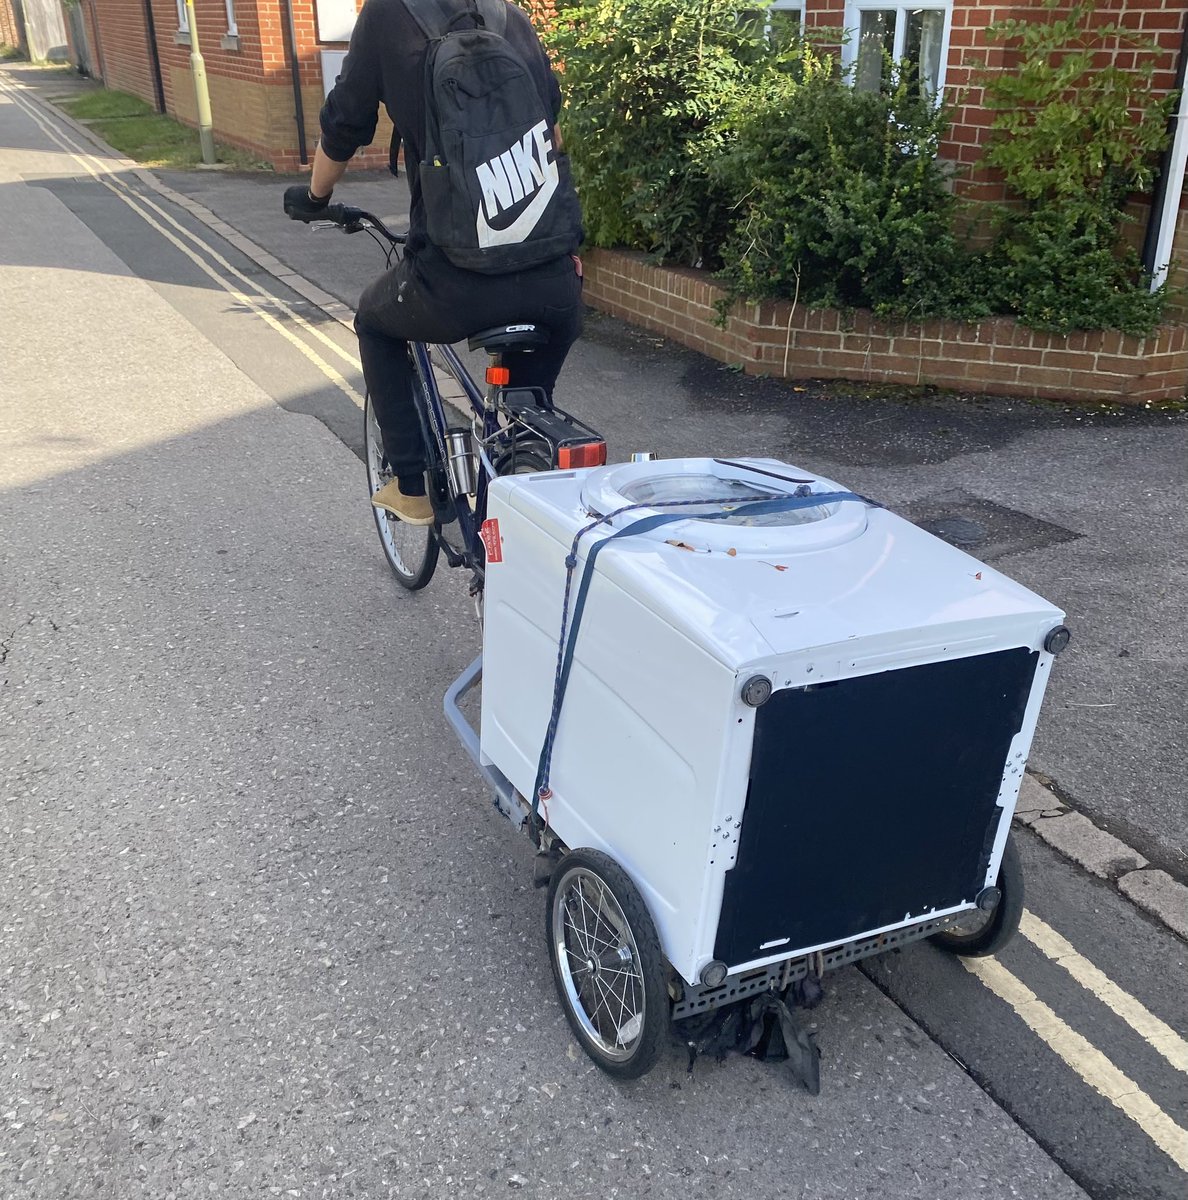 You can’t carry a washing machine on a bicycl… Oh. 

Spotted in #Oxford #quaxing #carryshitolympics